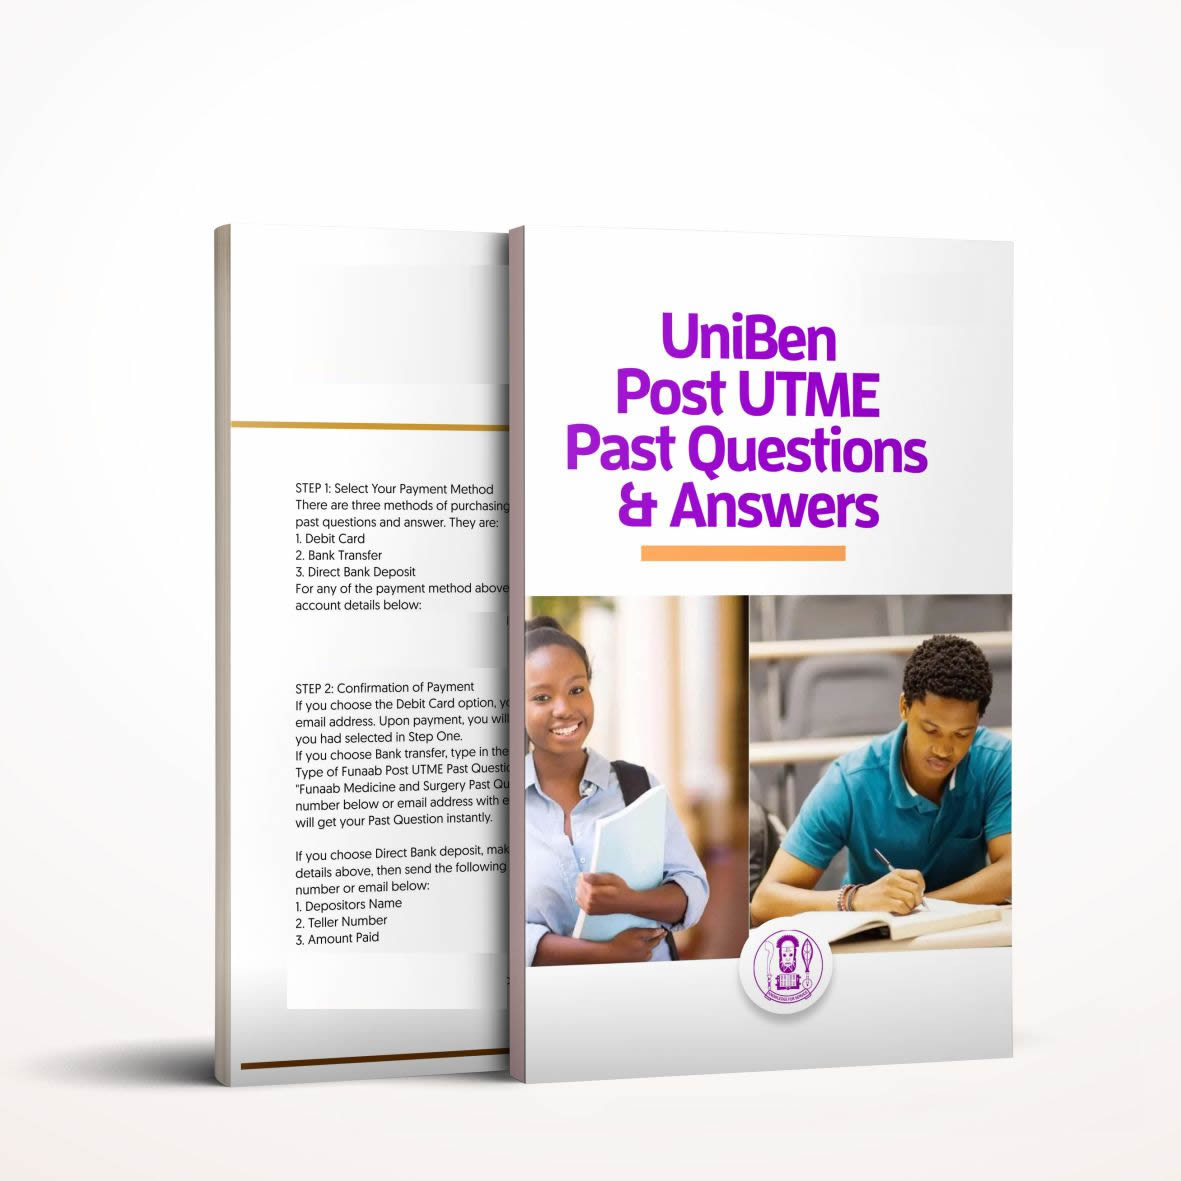 UNIBEN Post UTME past questions and answers